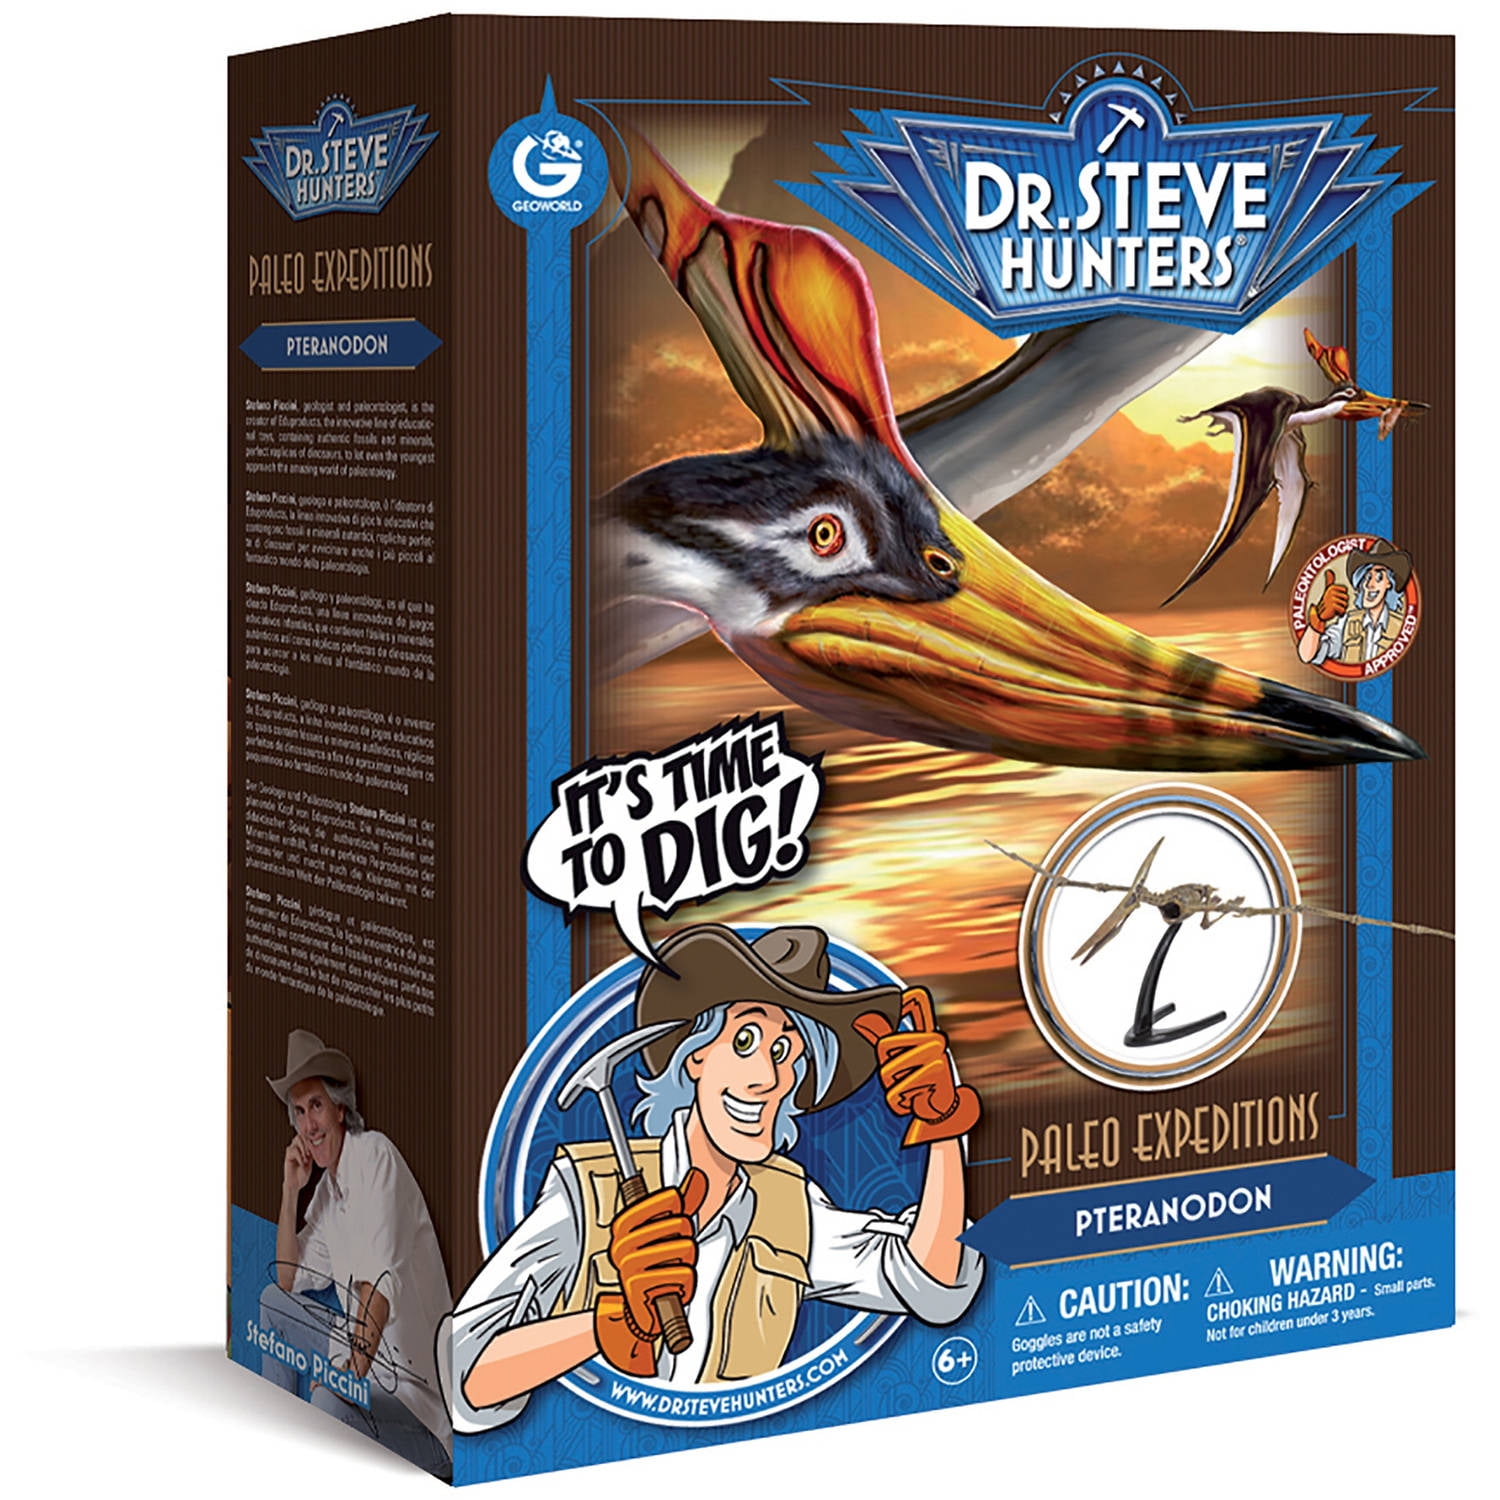 dr. steve hunters dinosaurs collection